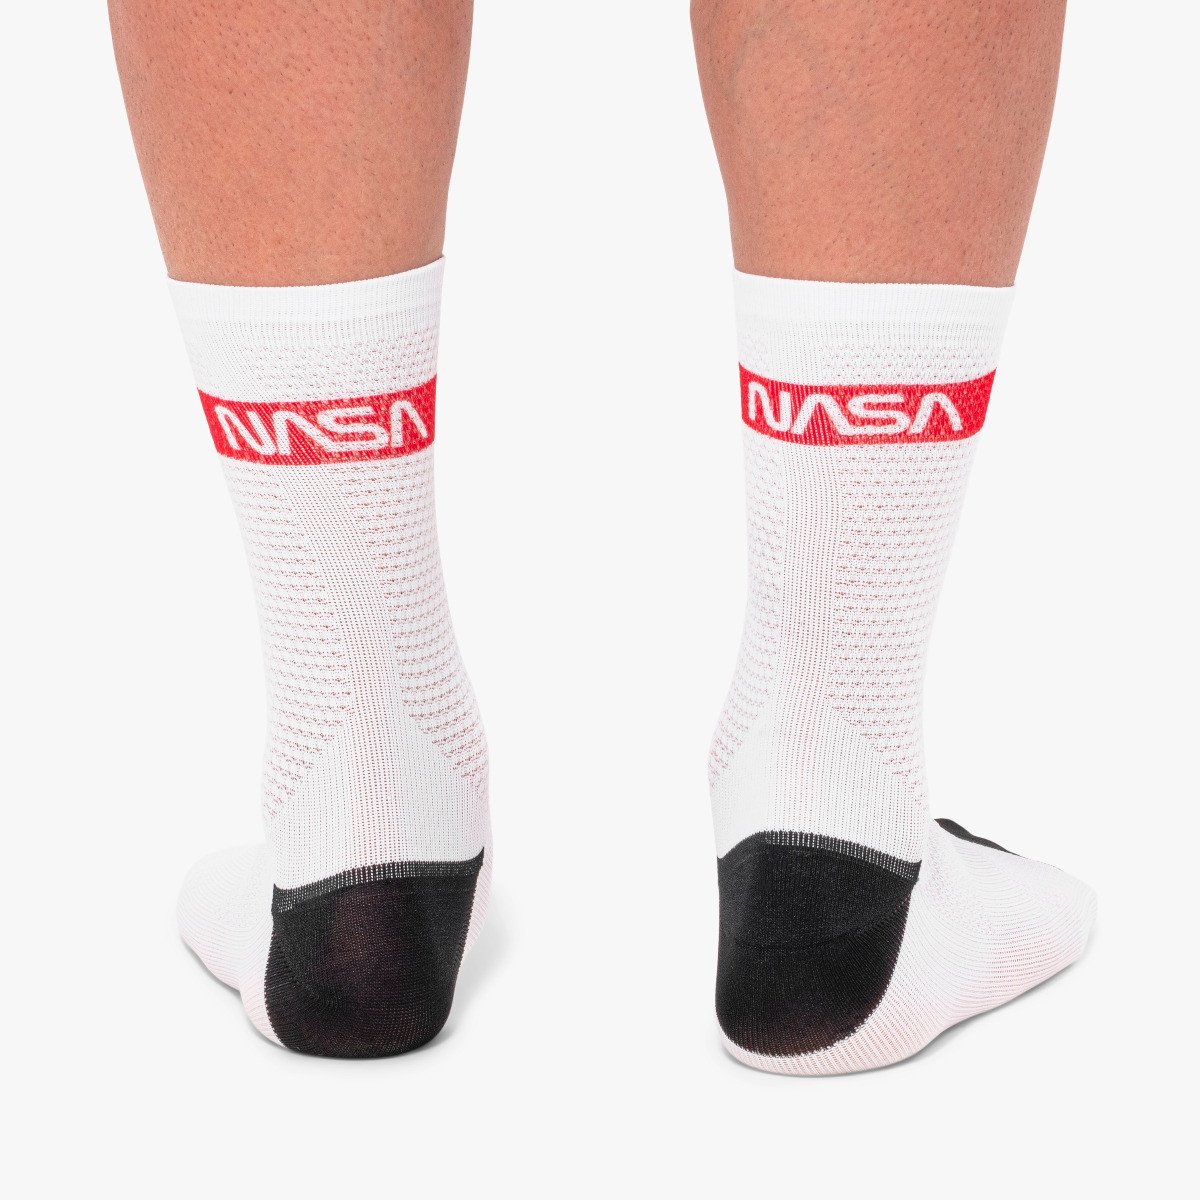 CHAUSSETTE SCICON X SPACE AGENCY 05